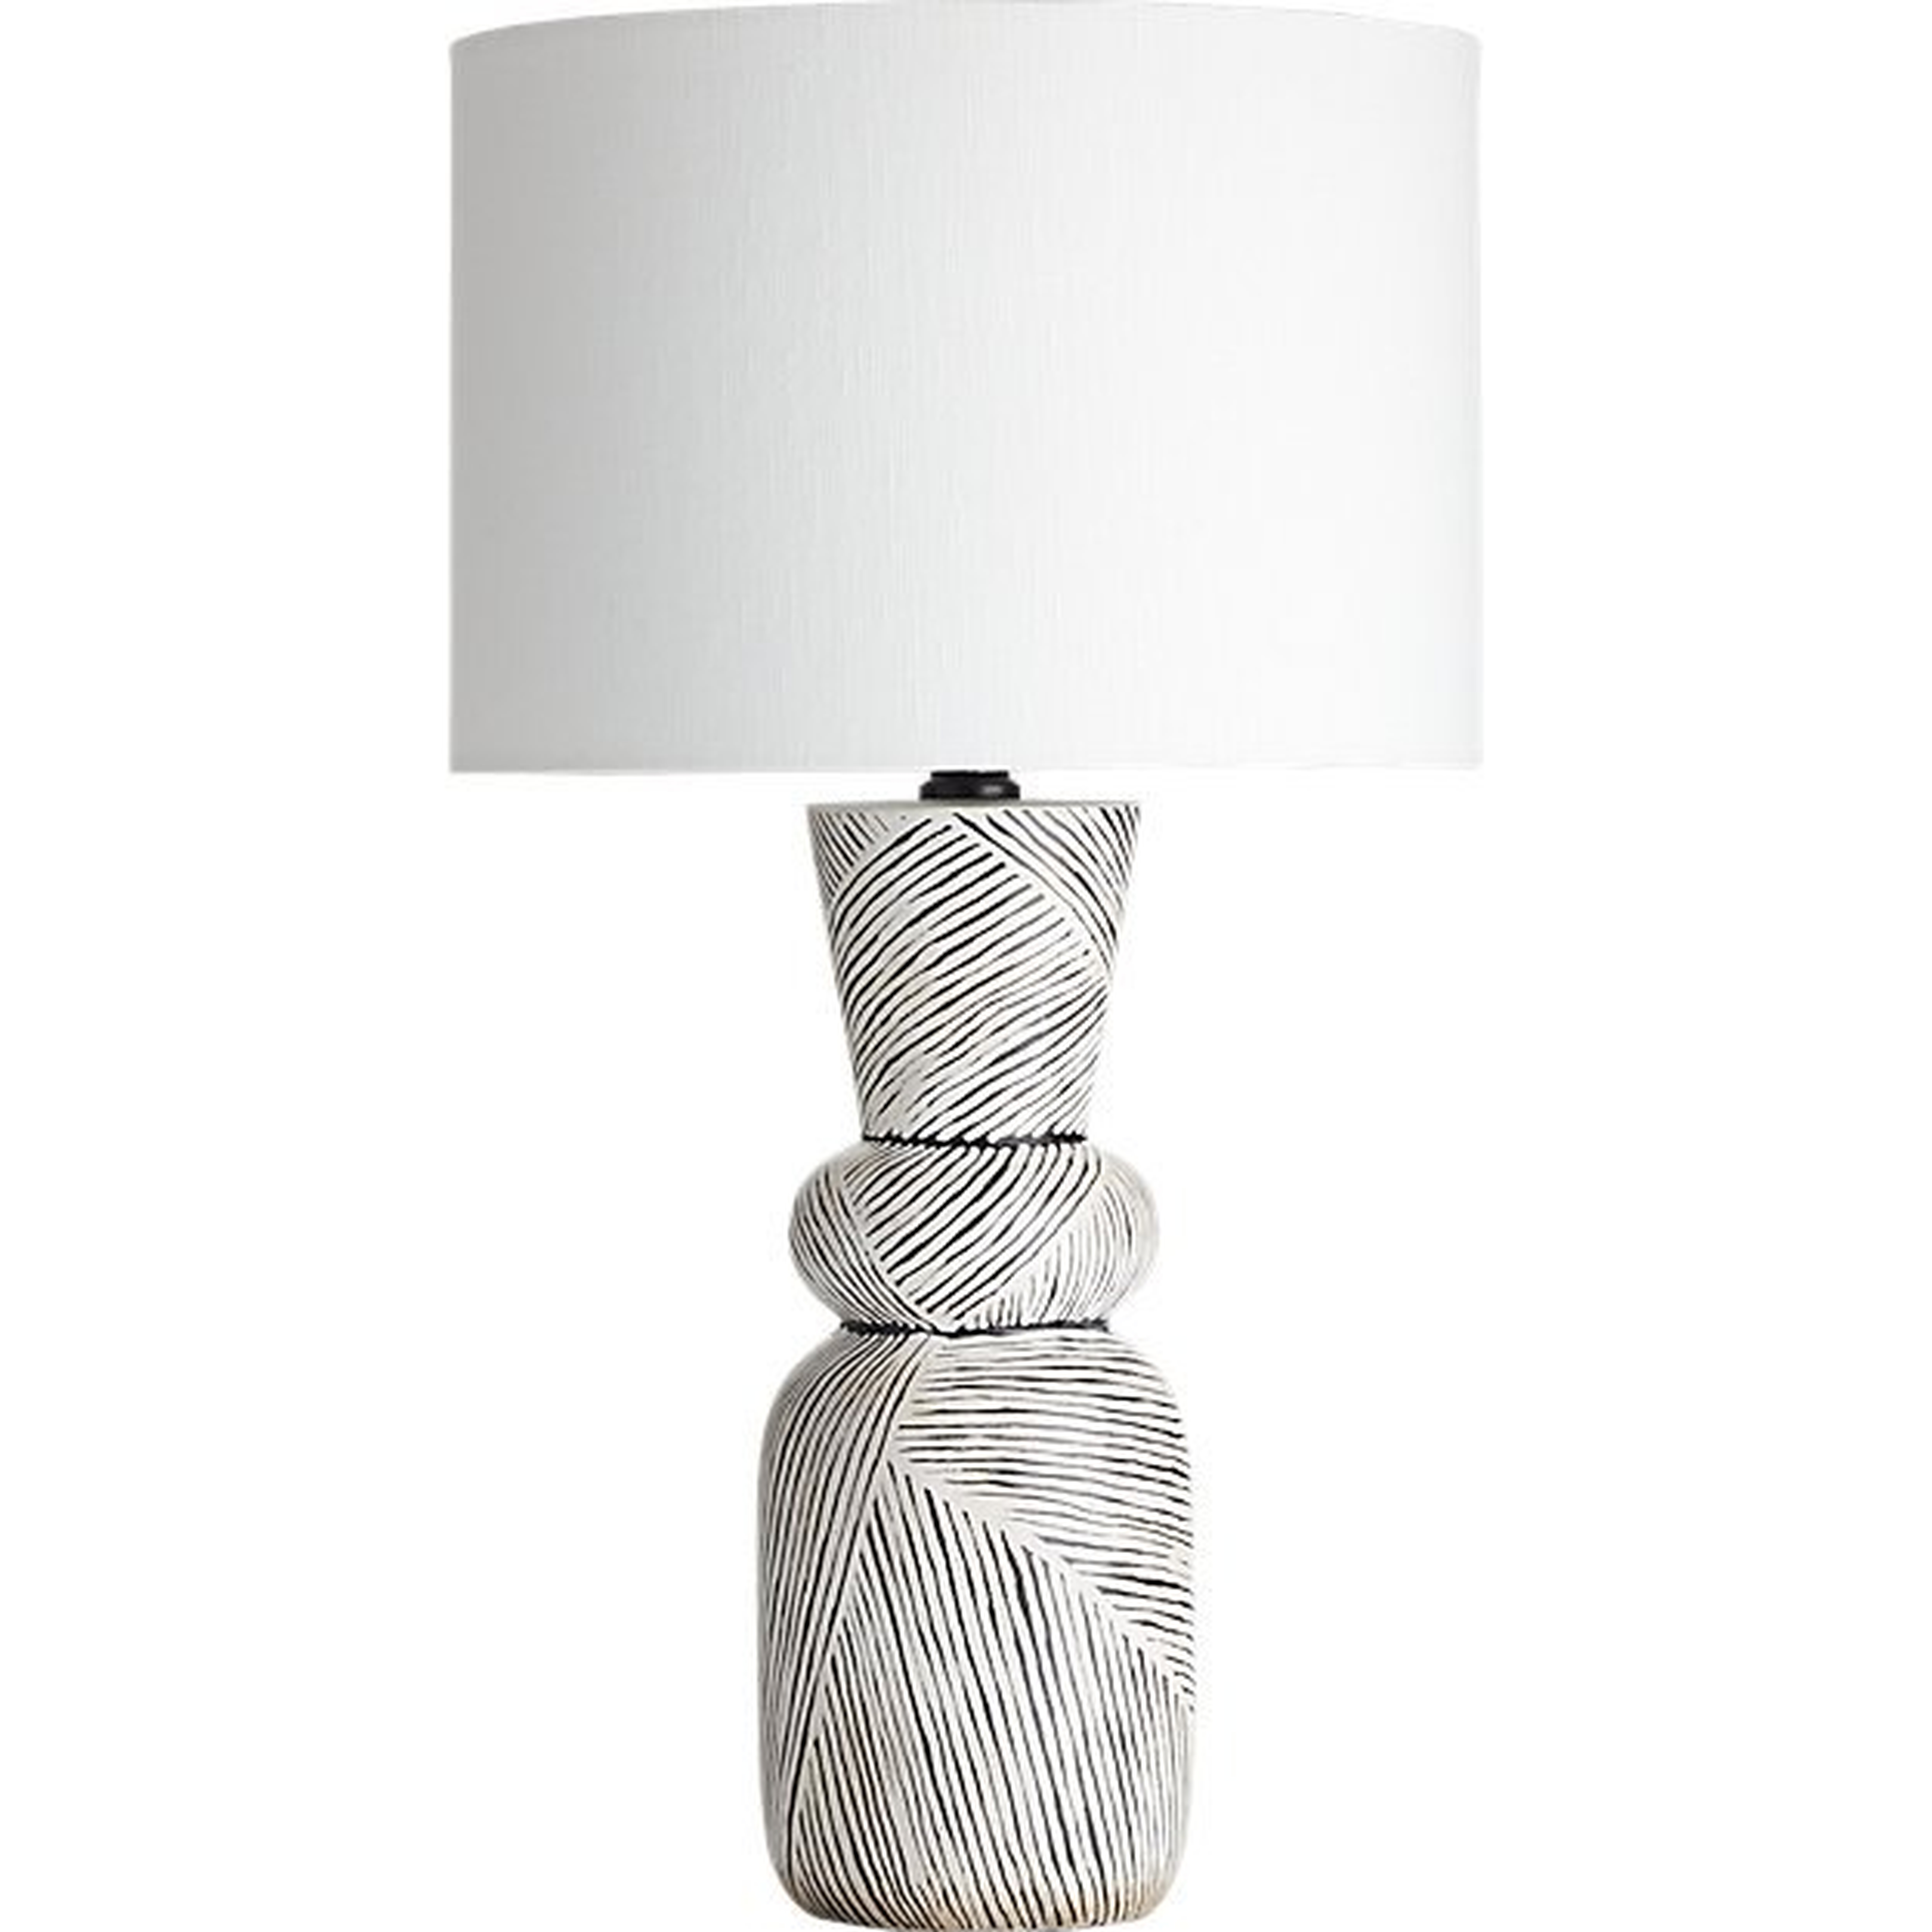 Ziggy Black and White Striped Table Lamp - CB2